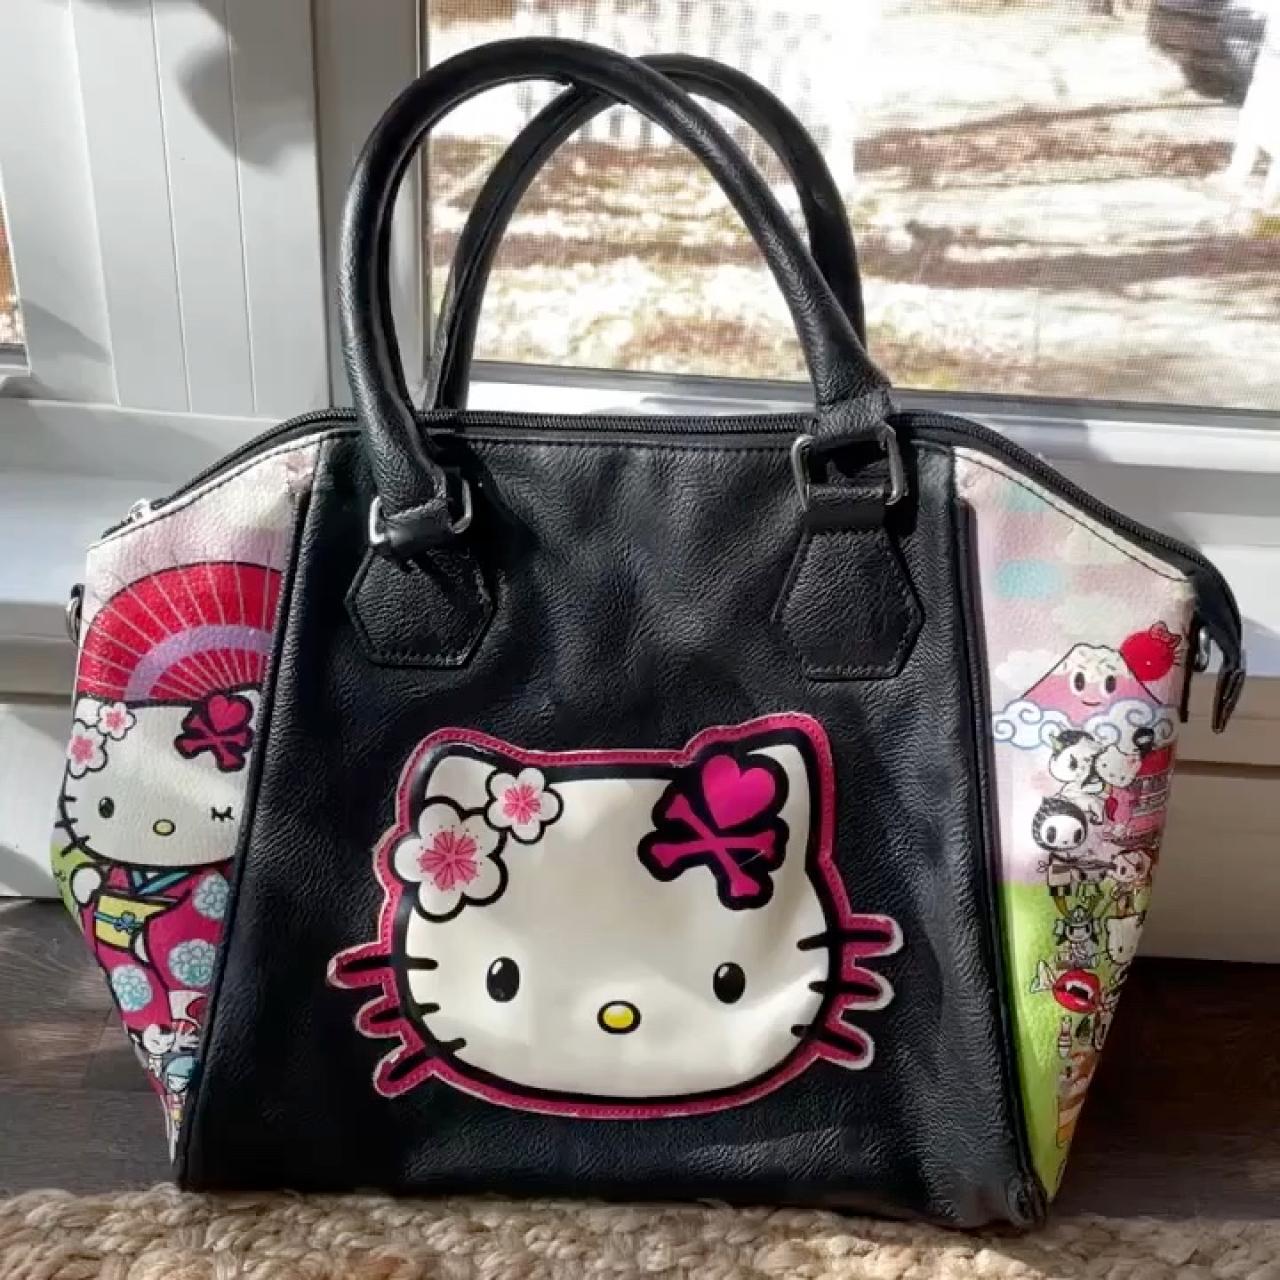 Mall goth inspired hello kitty backpack—> available on depop or dm